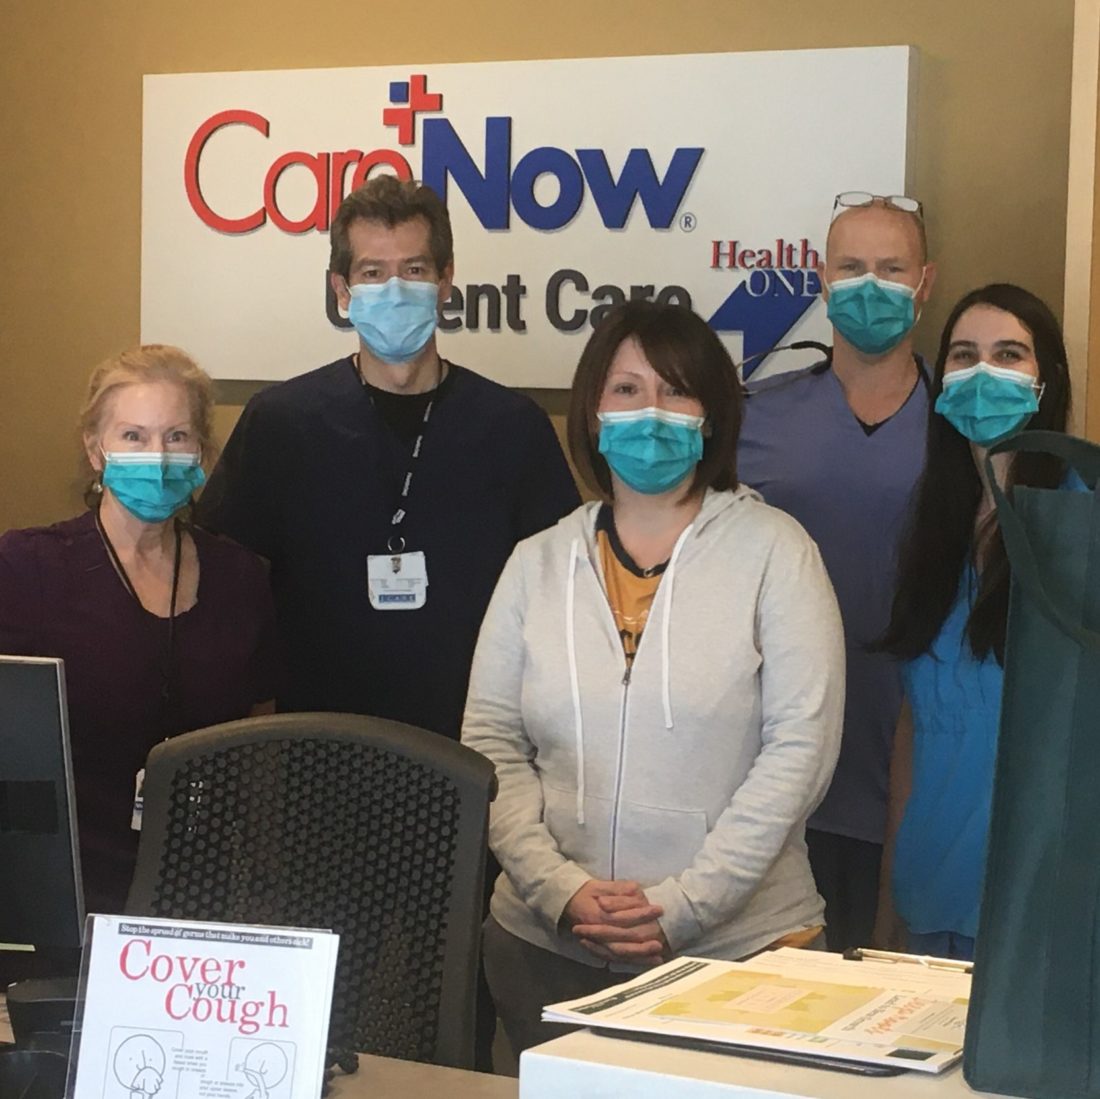 Five urgent care employees wearing face masks